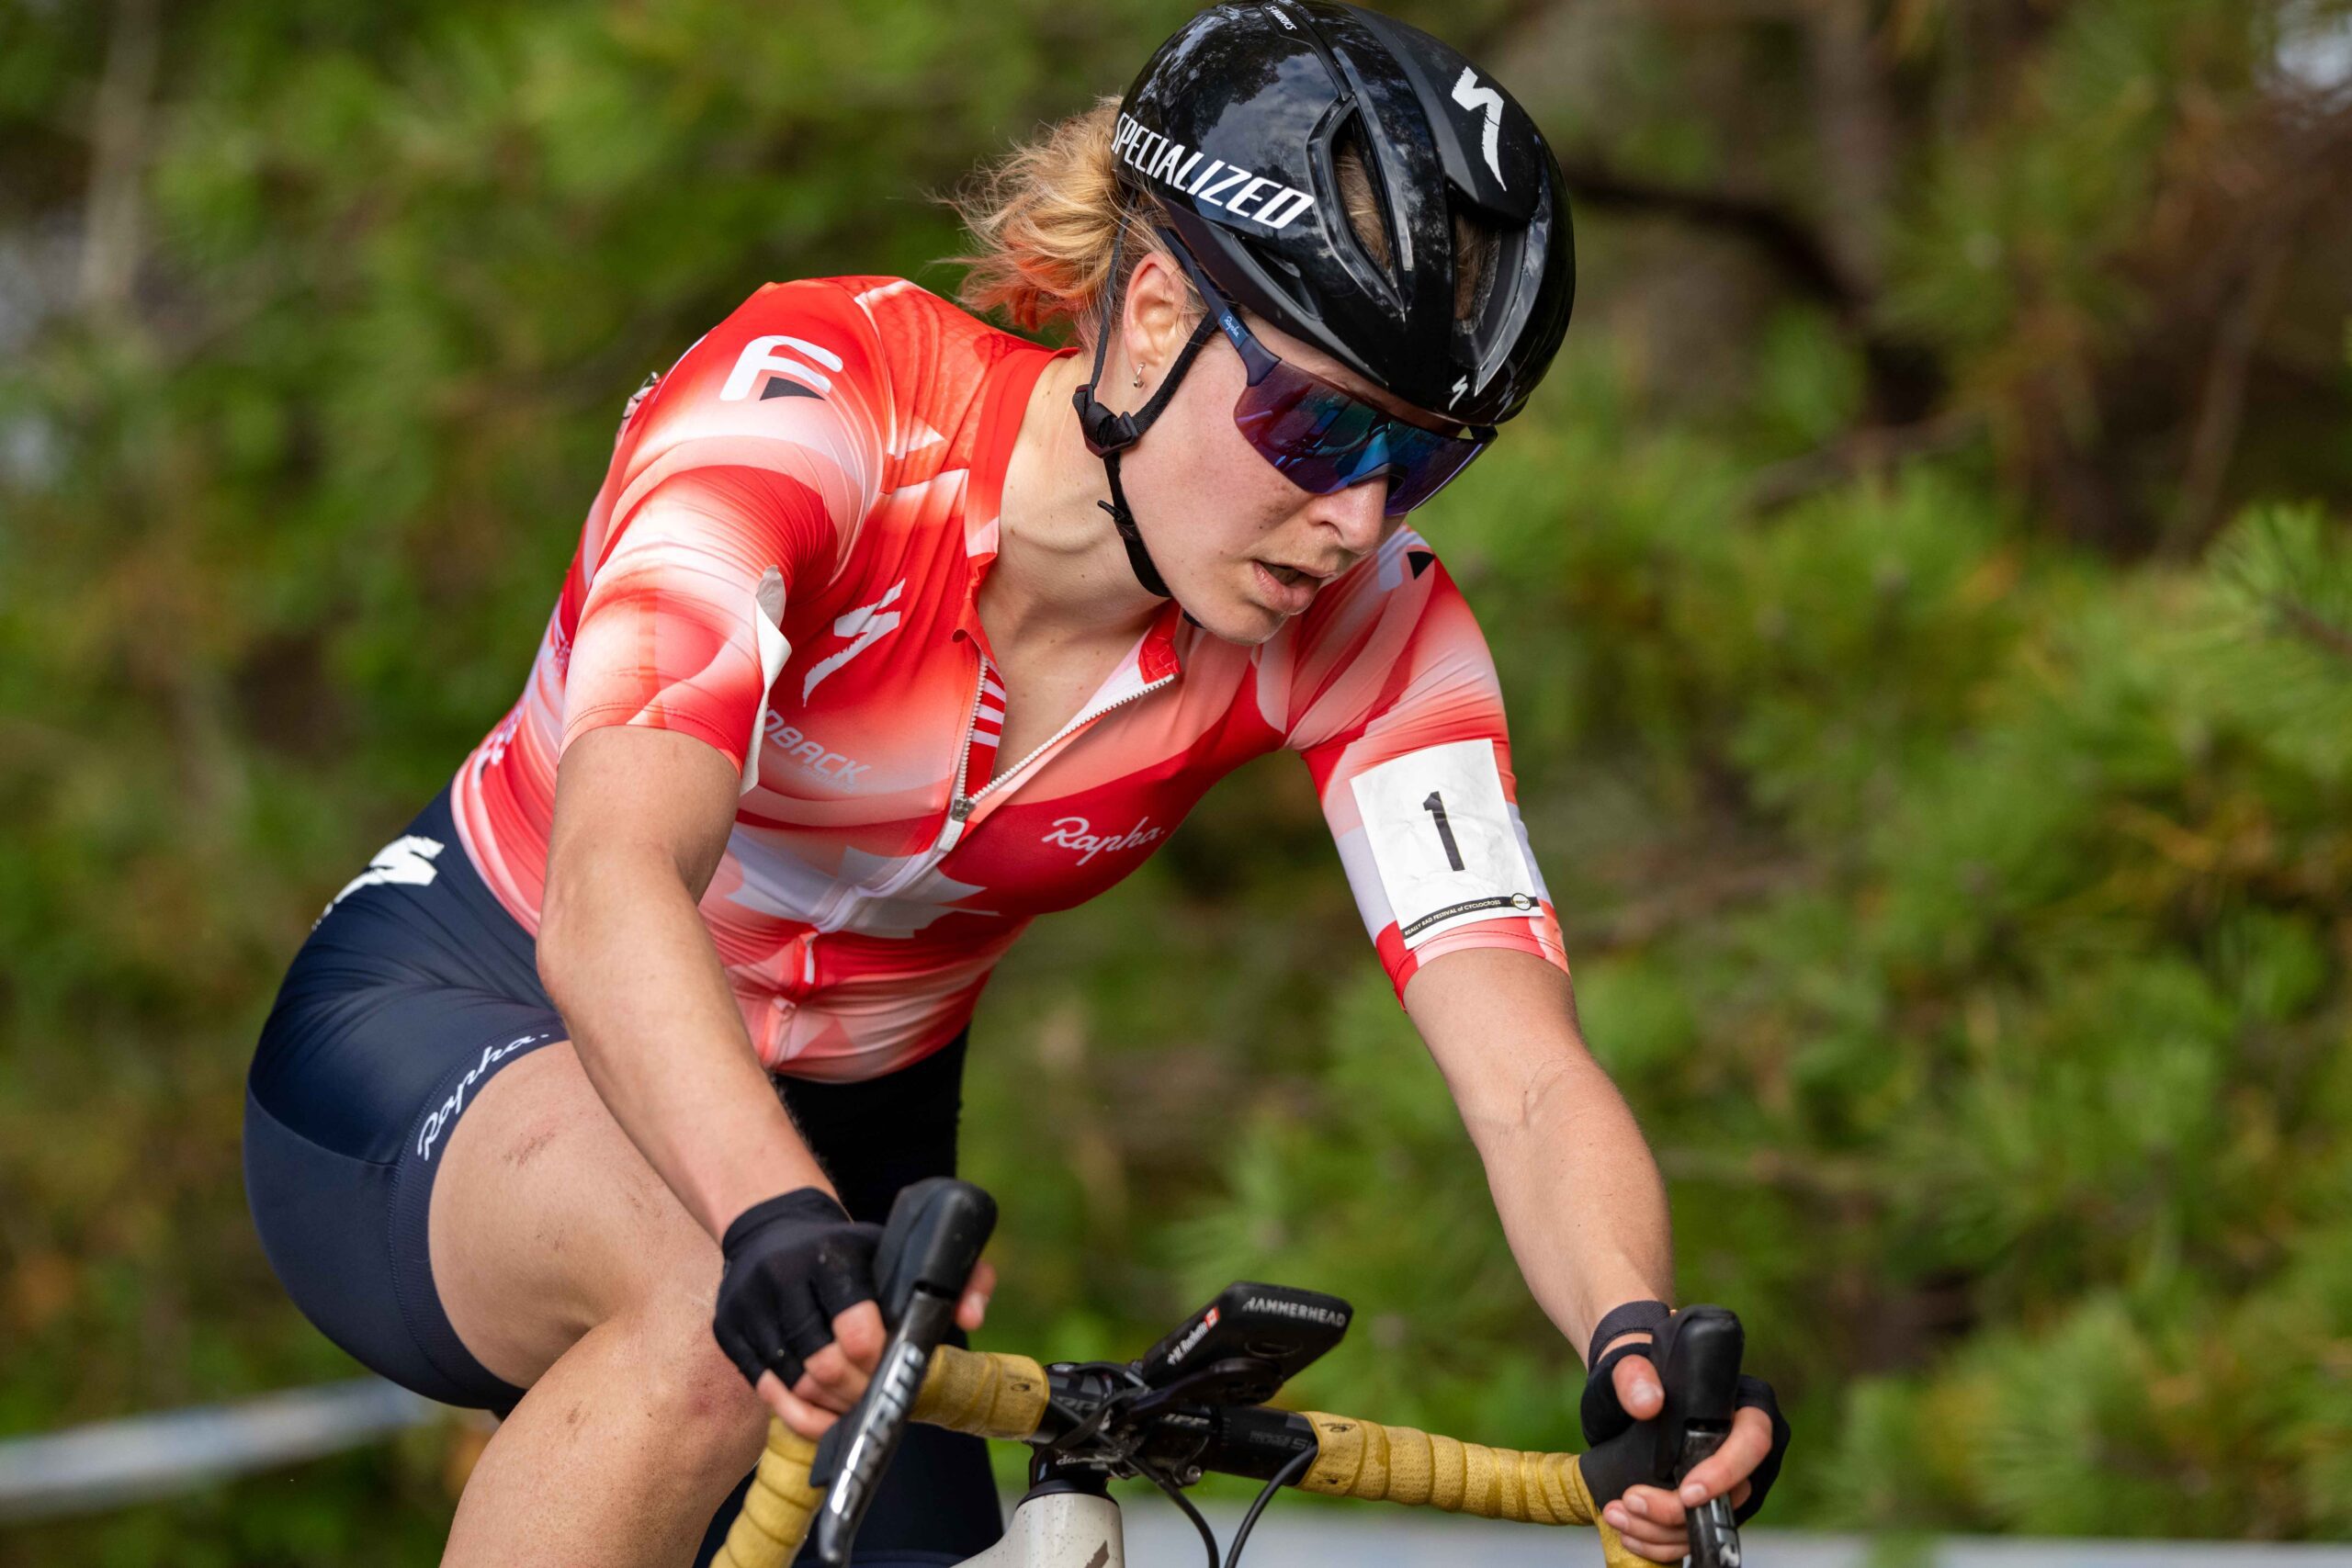 Why we won’t see the defending cyclocross national champion in Victoria